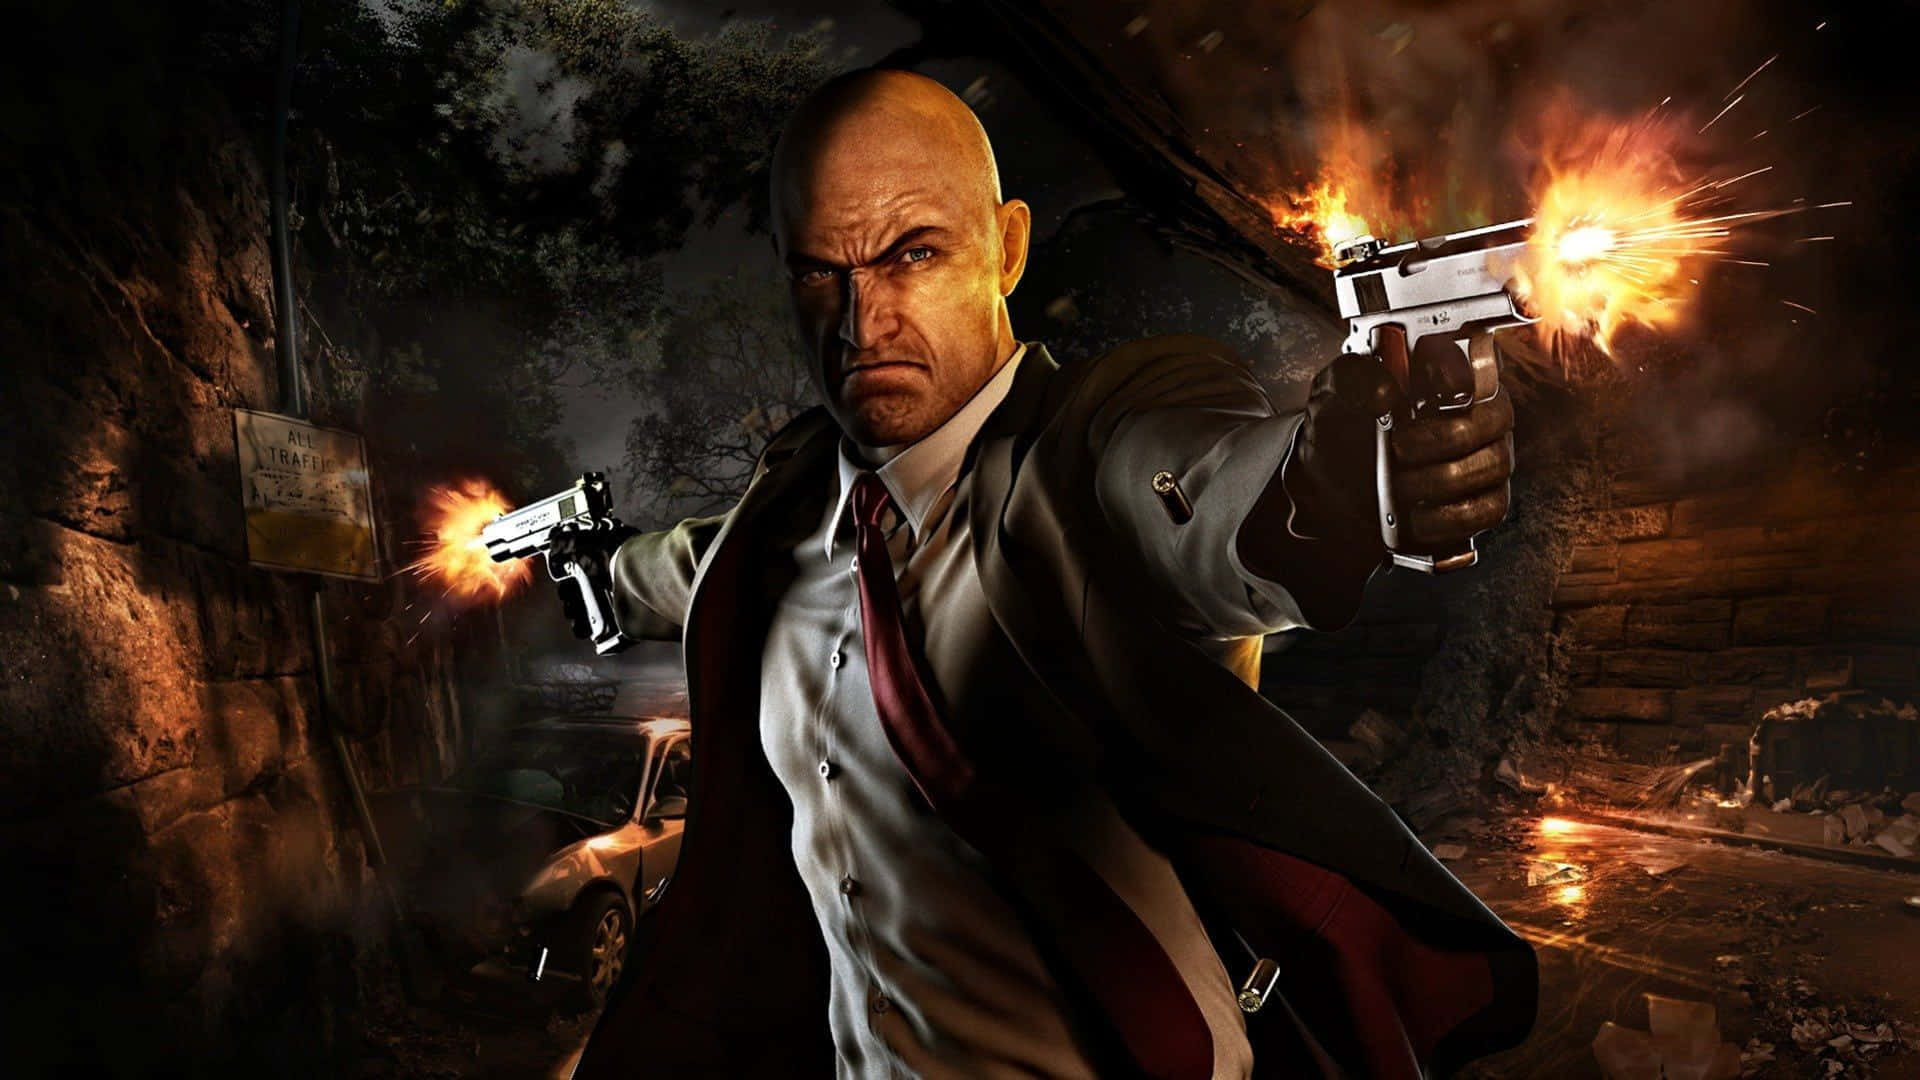 An Agent 47 lookalike in a sleek trench coat, ready for his next mission. Wallpaper